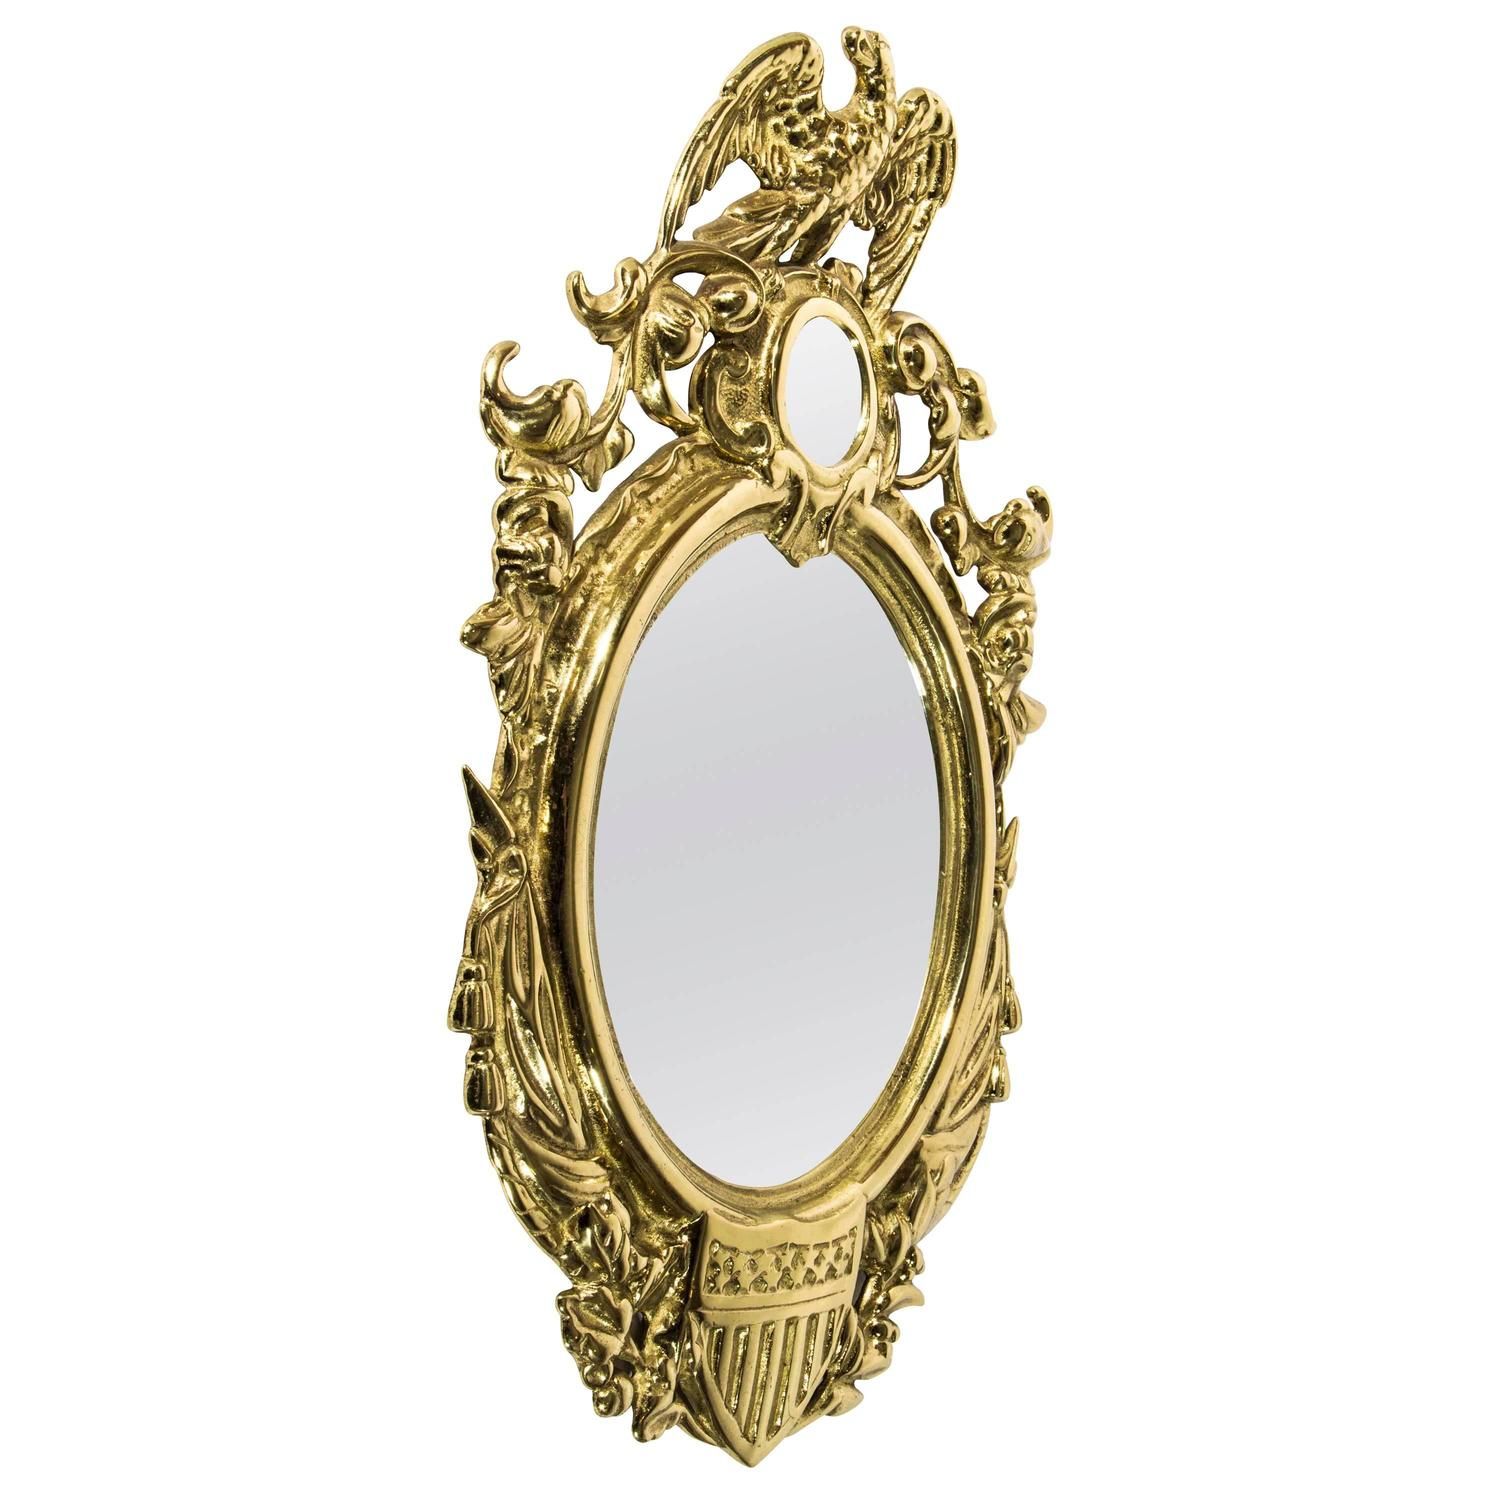 Antique Brass Wall Mirror At 1stdibs With Antique Brass Standing Mirrors (View 11 of 15)